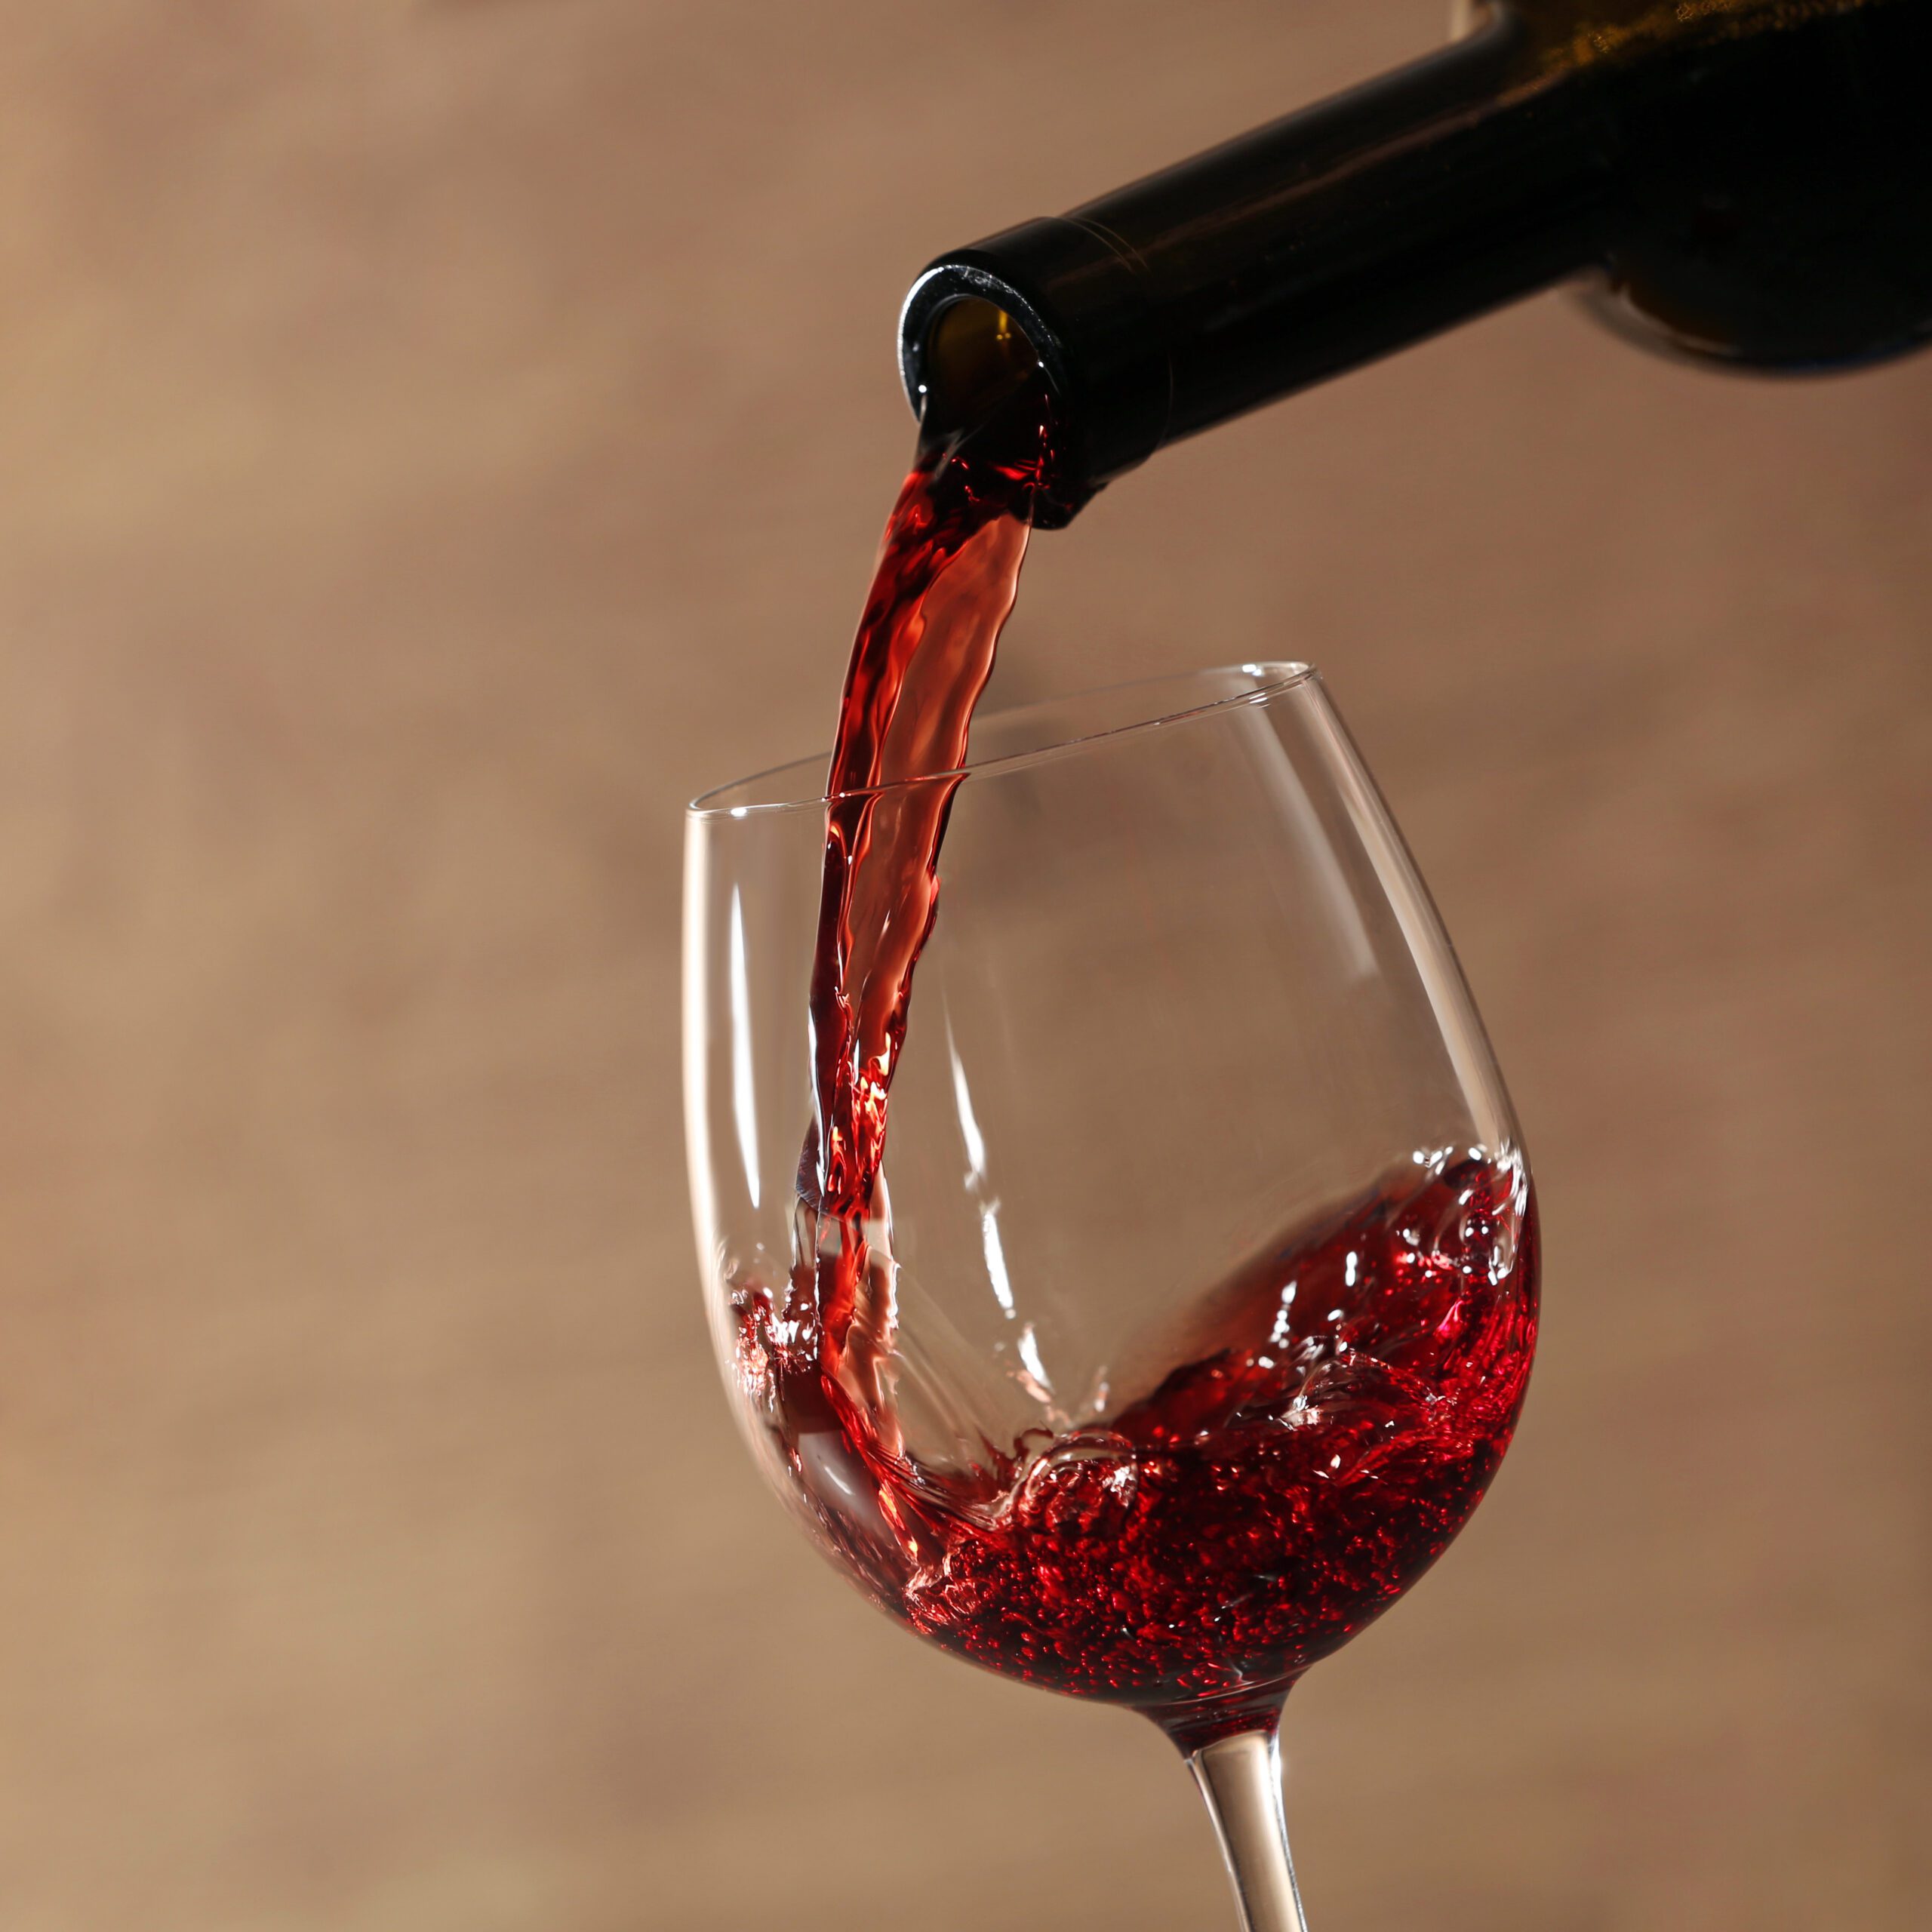 Pouring red wine into glass from bottle against blurred beige background, closeup.